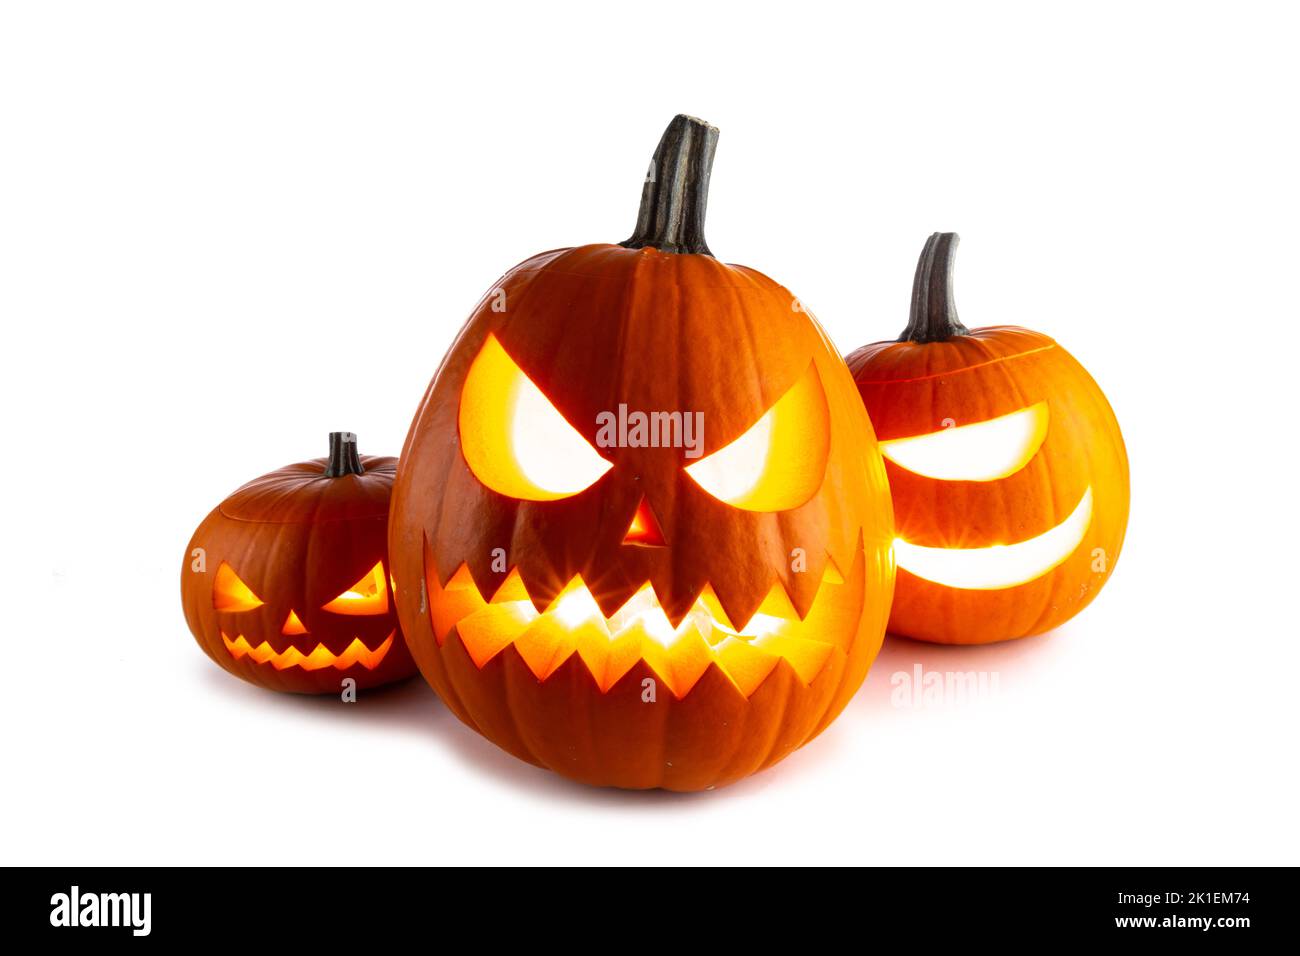 Three Halloween glowing funny lantern pumpkins isolated on white background Stock Photo